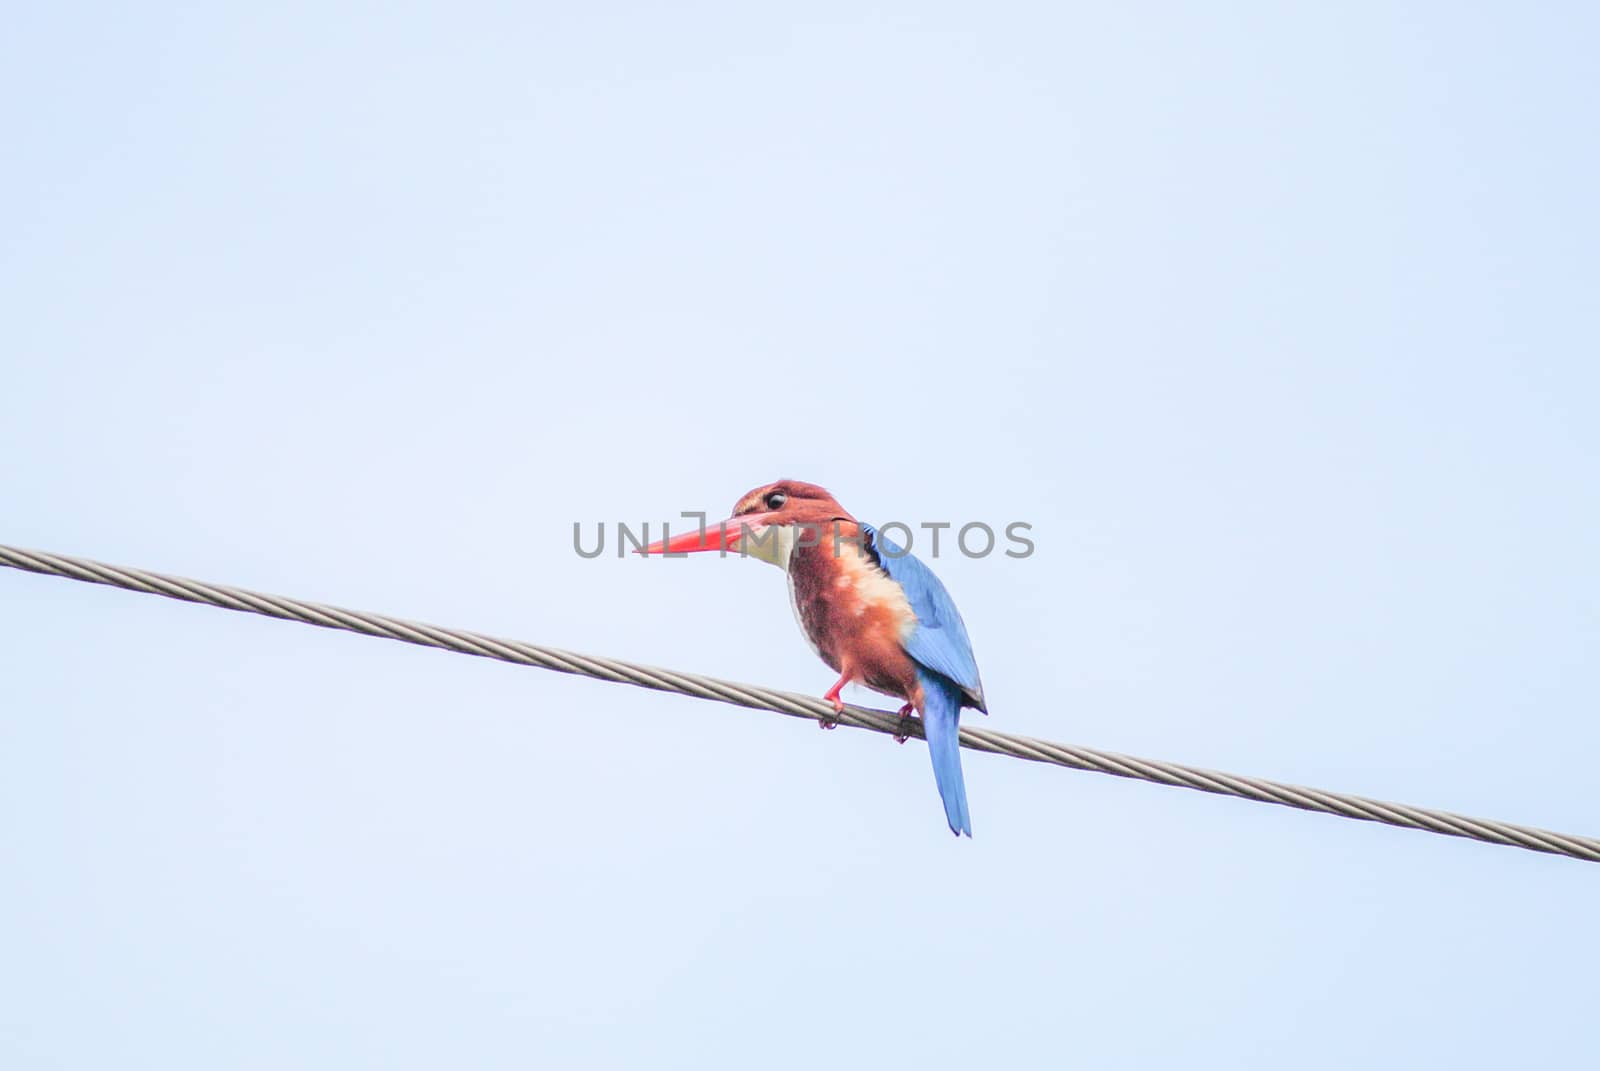 White-throated kingfisher (Halcyon smyrnensis), widely distribut by yuiyuize